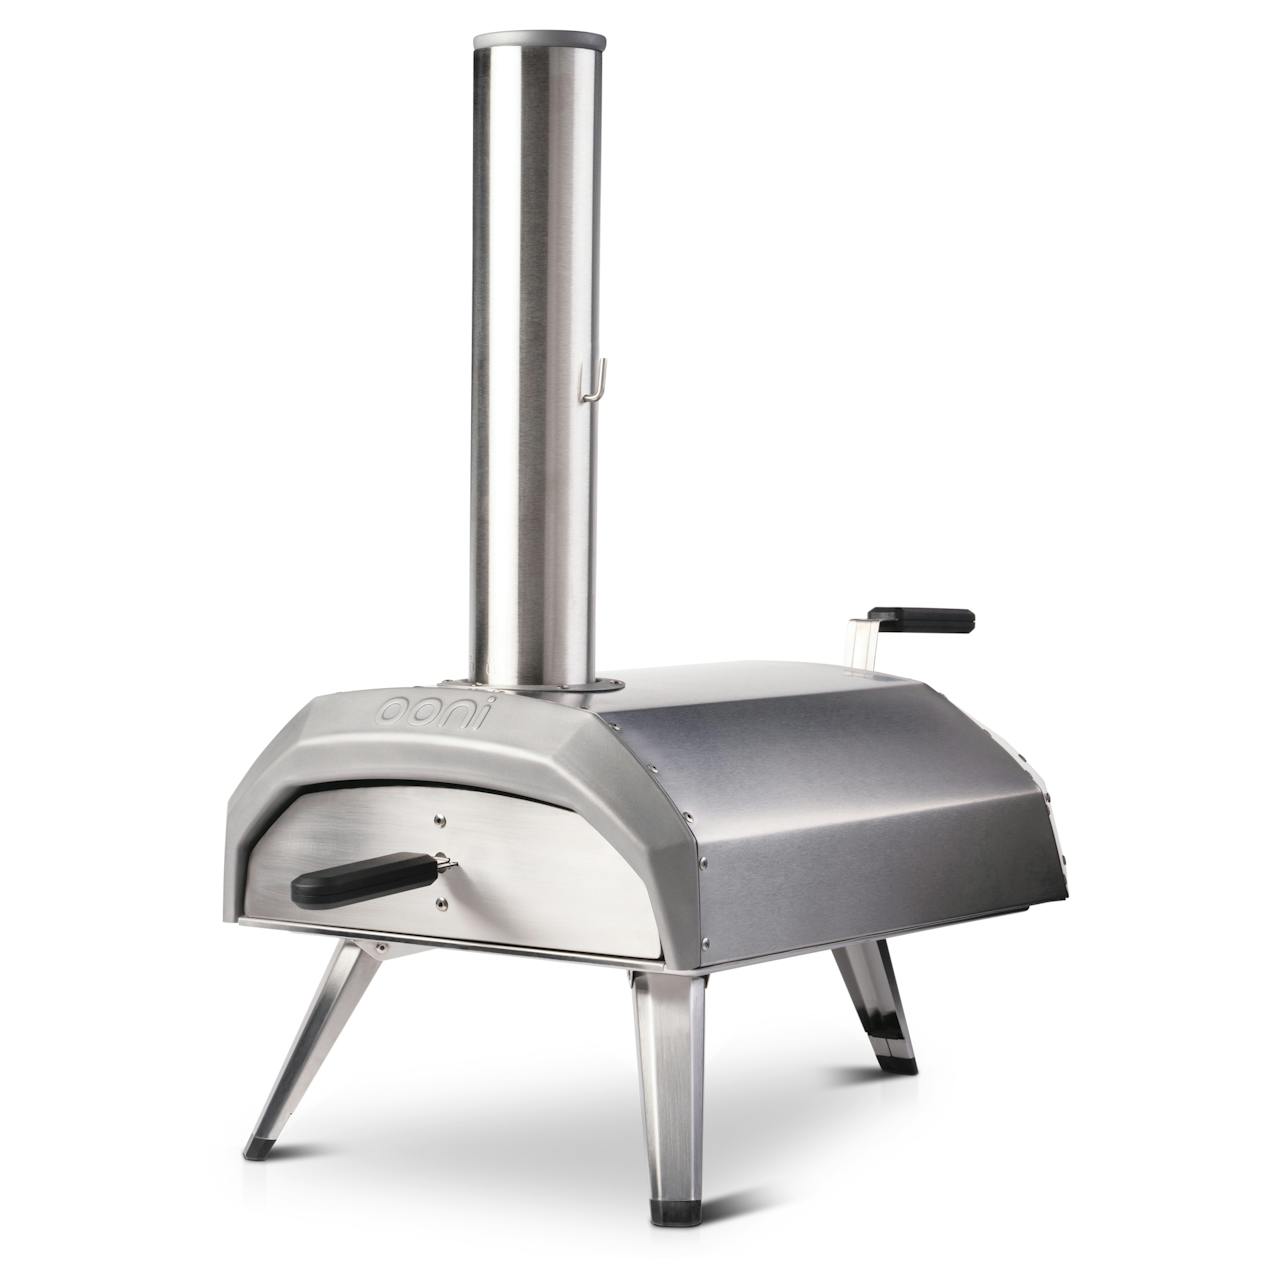 Ooni Ooni Karu Wood and Charcoal-Fired Portable Pizza Oven